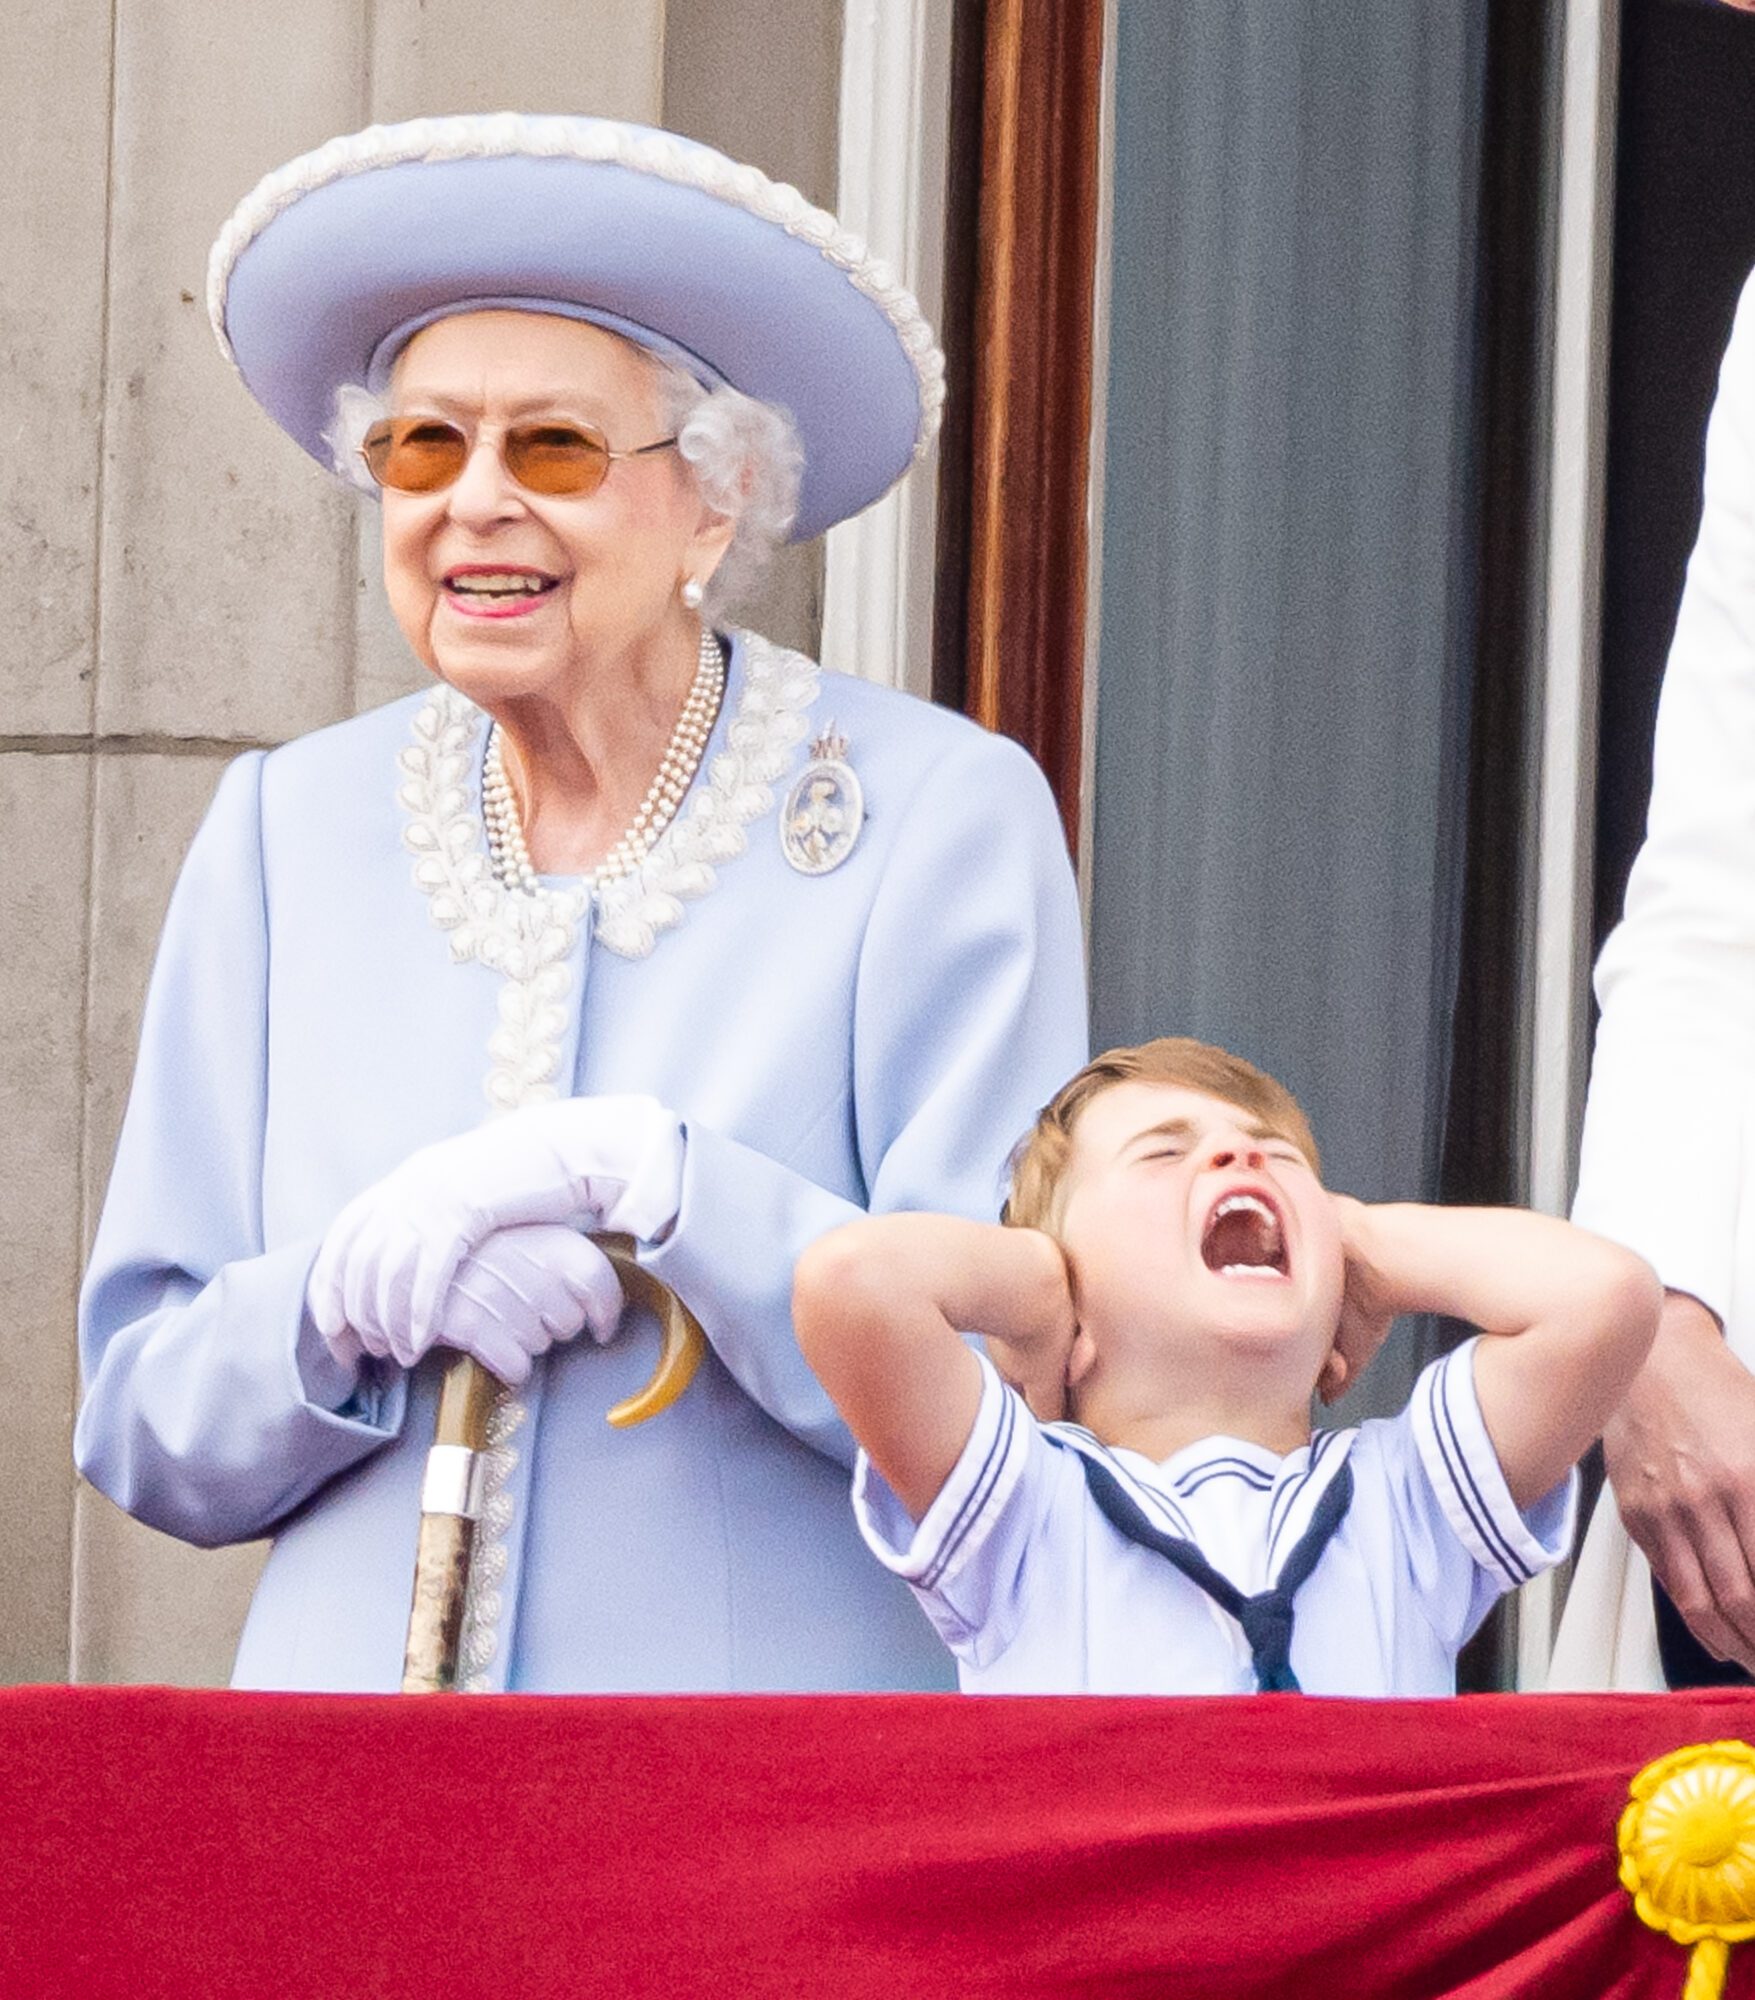 LONDON, ENGLAND - JUNE 02: Queen Elizabeth II and Prince Louis of Cambridge during Trooping the Colour on June 02, 2022 in London, England. Queen Elizabeth II, Prince Louis, Catherine, Duchess of Cambridge an Princess Charlotte during Trooping the Colour on June 02, 2022 in London, England.  on June 02, 2022 in London, England.Trooping The Colour, also known as The Queen's Birthday Parade, is a military ceremony performed by regiments of the British Army that has taken place since the mid-17th century. It marks the official birthday of the British Sovereign. This year, from June 2 to June 5, 2022, there is the added celebration of the Platinum Jubilee of Elizabeth II  in the UK and Commonwealth to mark the 70th anniversary of her accession to the throne on 6 February 1952. (Photo by Samir Hussein/WireImage)